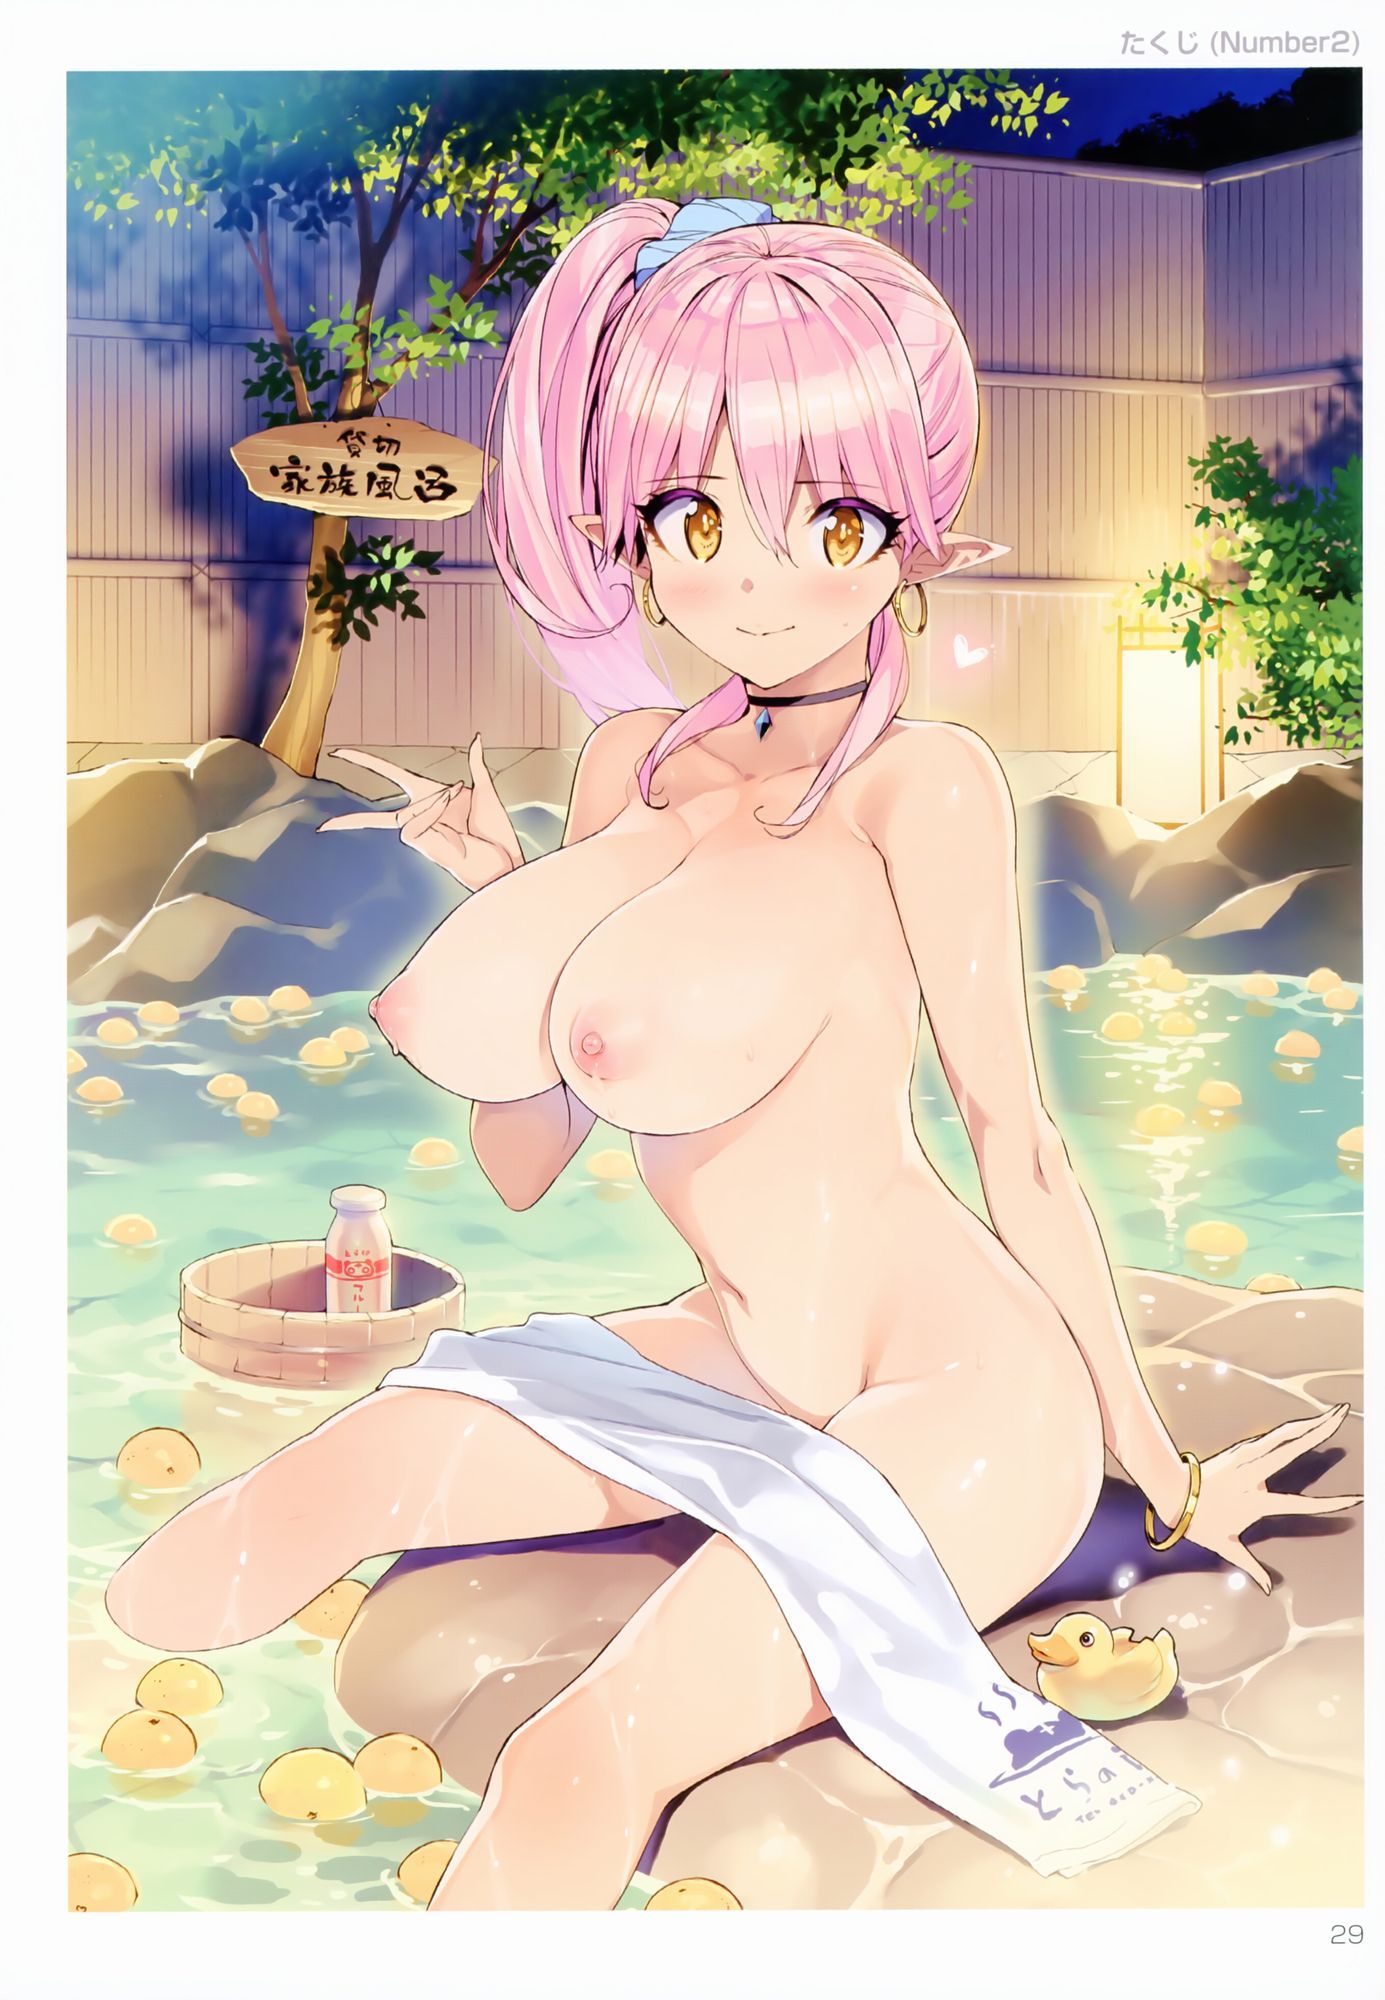 【Secondary erotic】 Click here for erotic images of girls in baths and hot springs where nudes can be worshiped 4